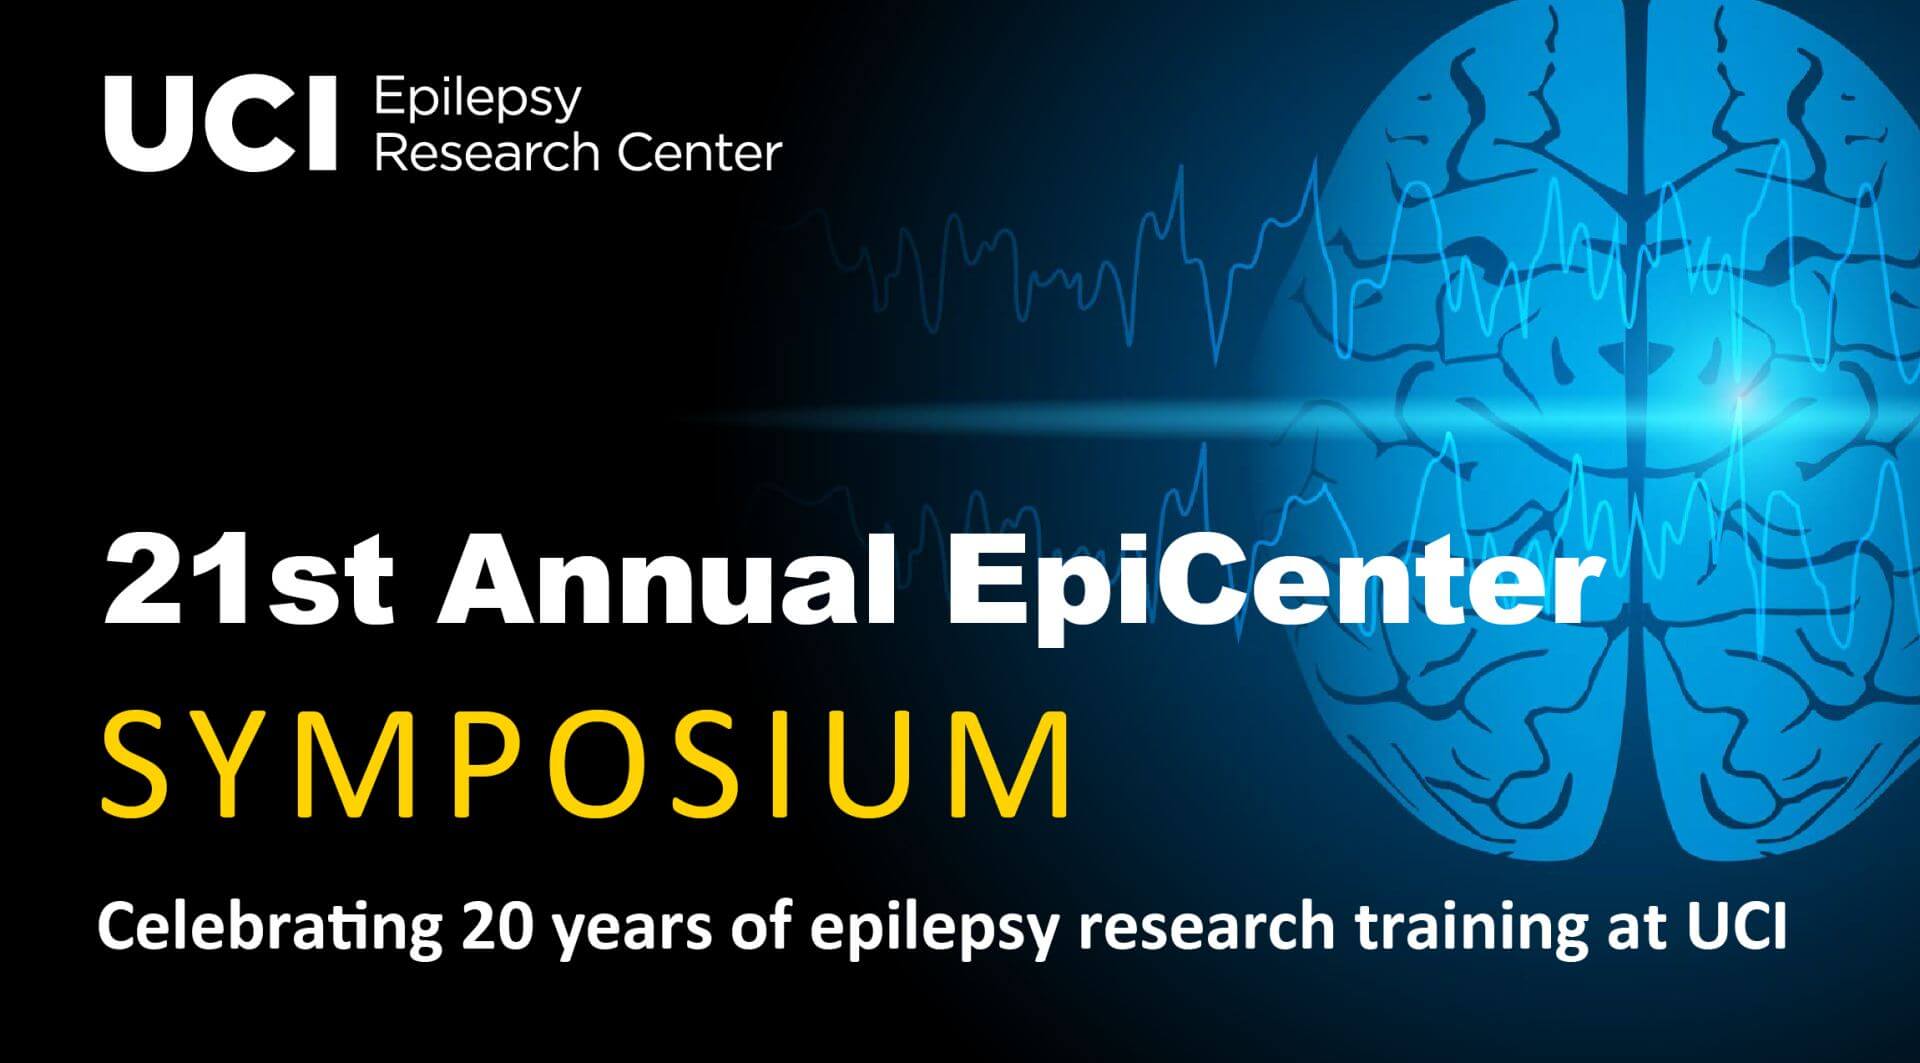 Text says: UCI Epilepsy Research Center. 21st Annual EpiCenter Symposium. Celebrating 20 years of epilepsy research training at UCI. Image of brain.